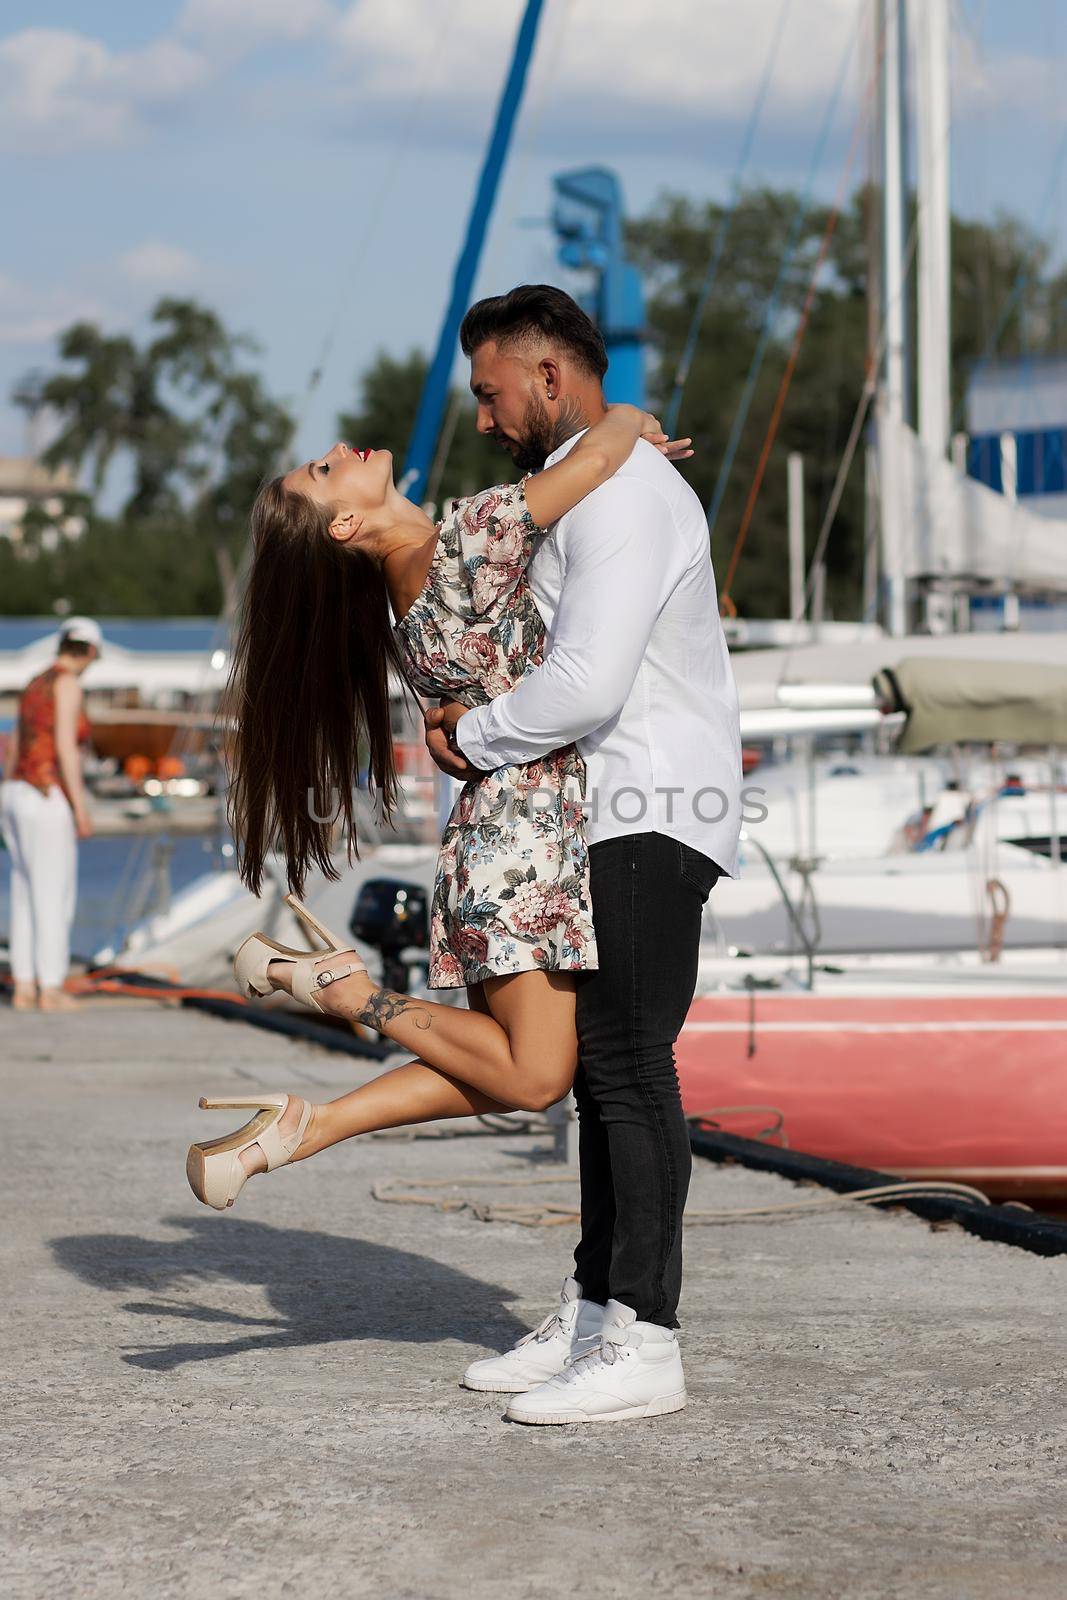 Side view of cheerful couple in love hugging in harbor with boats on sunny day in summer